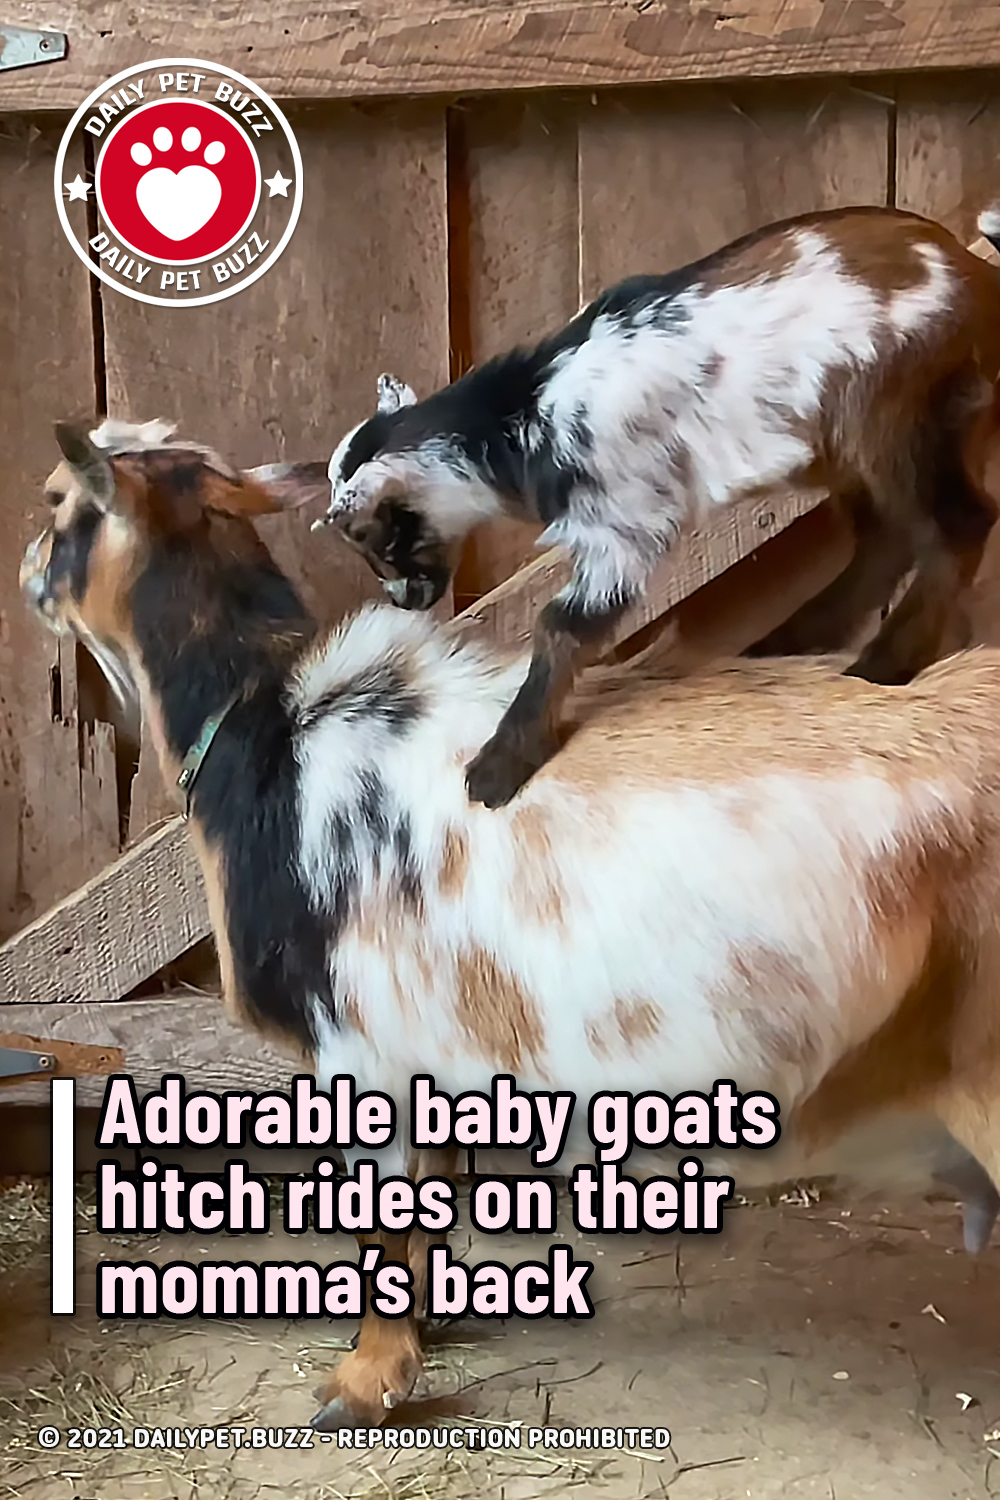 Adorable baby goats hitch rides on their momma’s back